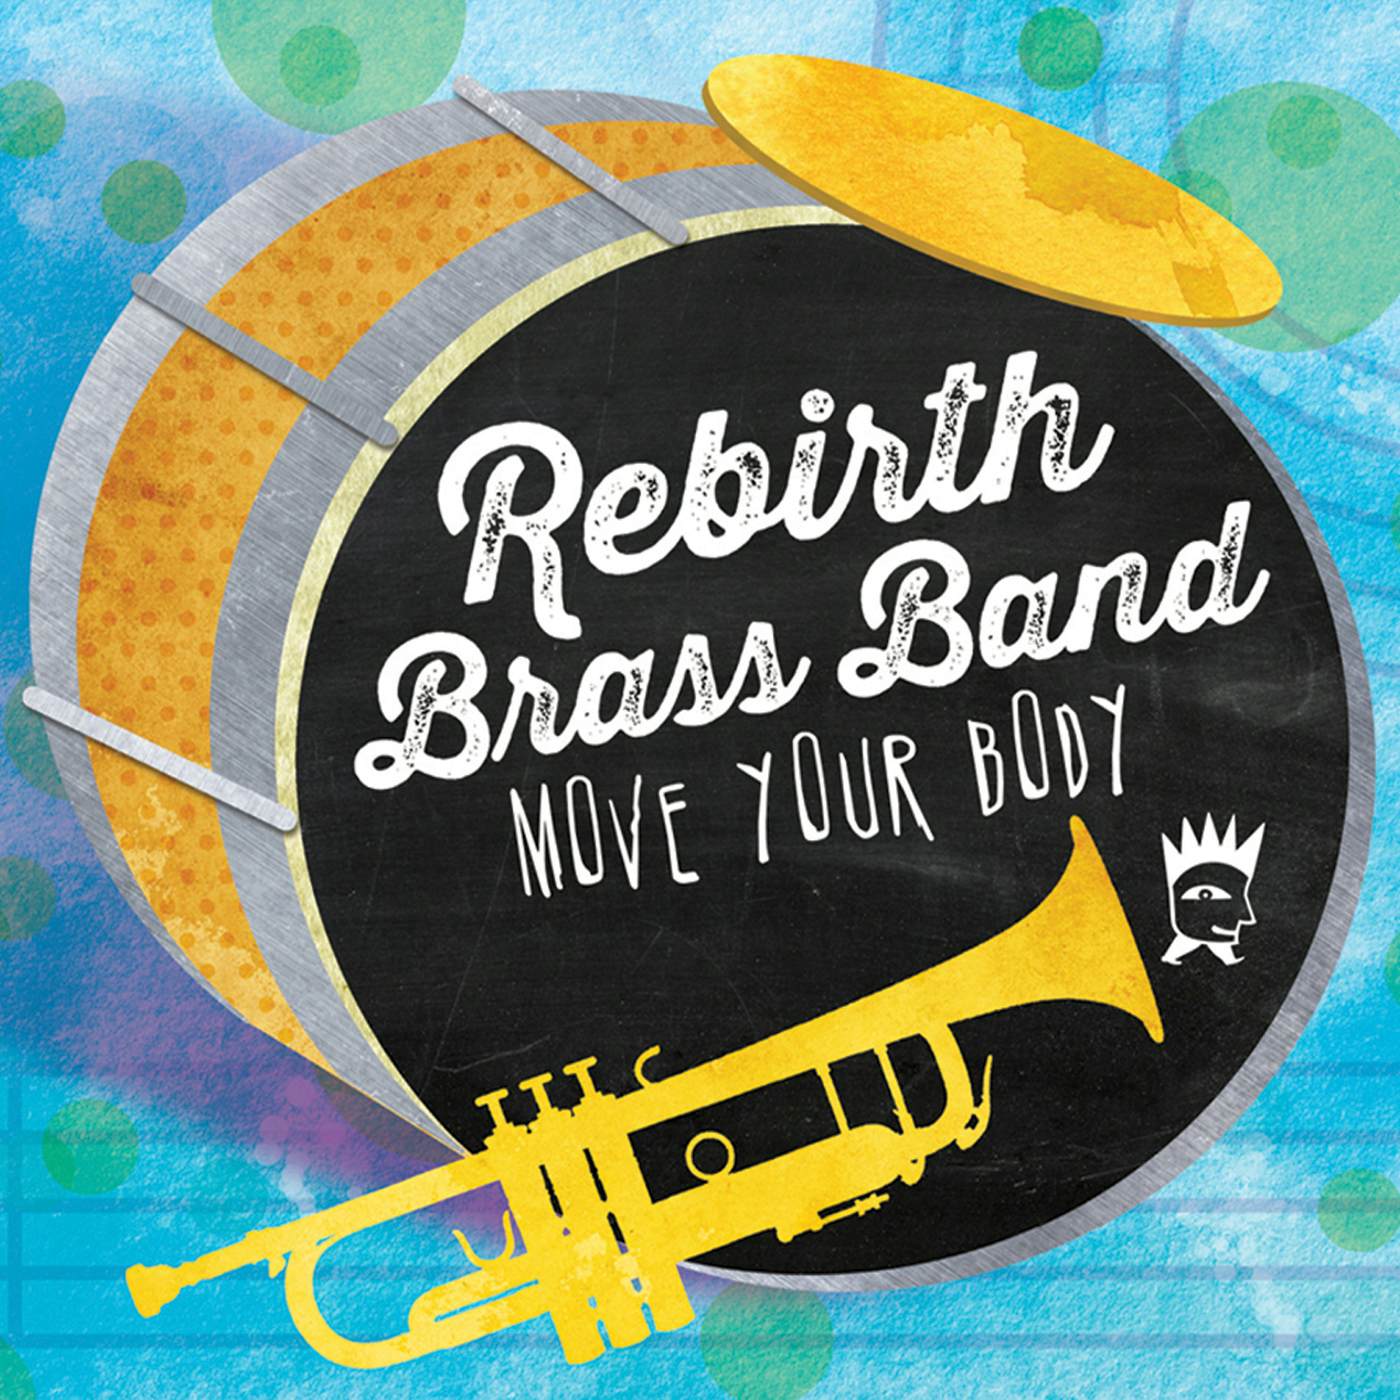 Rebirth Brass Band MOVE YOUR BODY CD